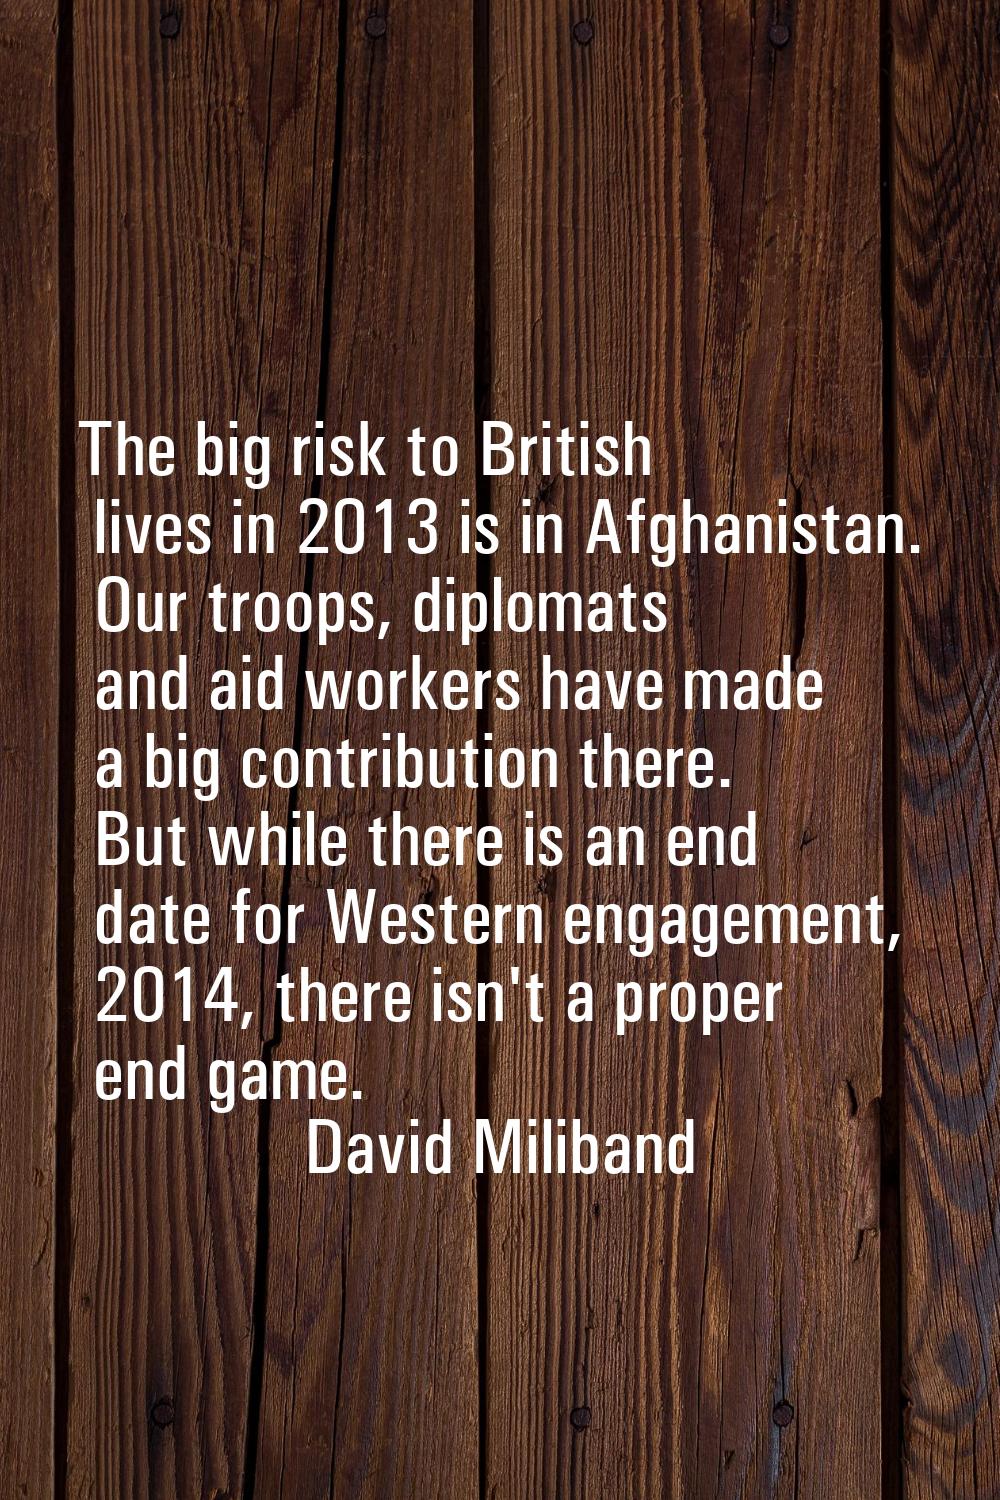 The big risk to British lives in 2013 is in Afghanistan. Our troops, diplomats and aid workers have